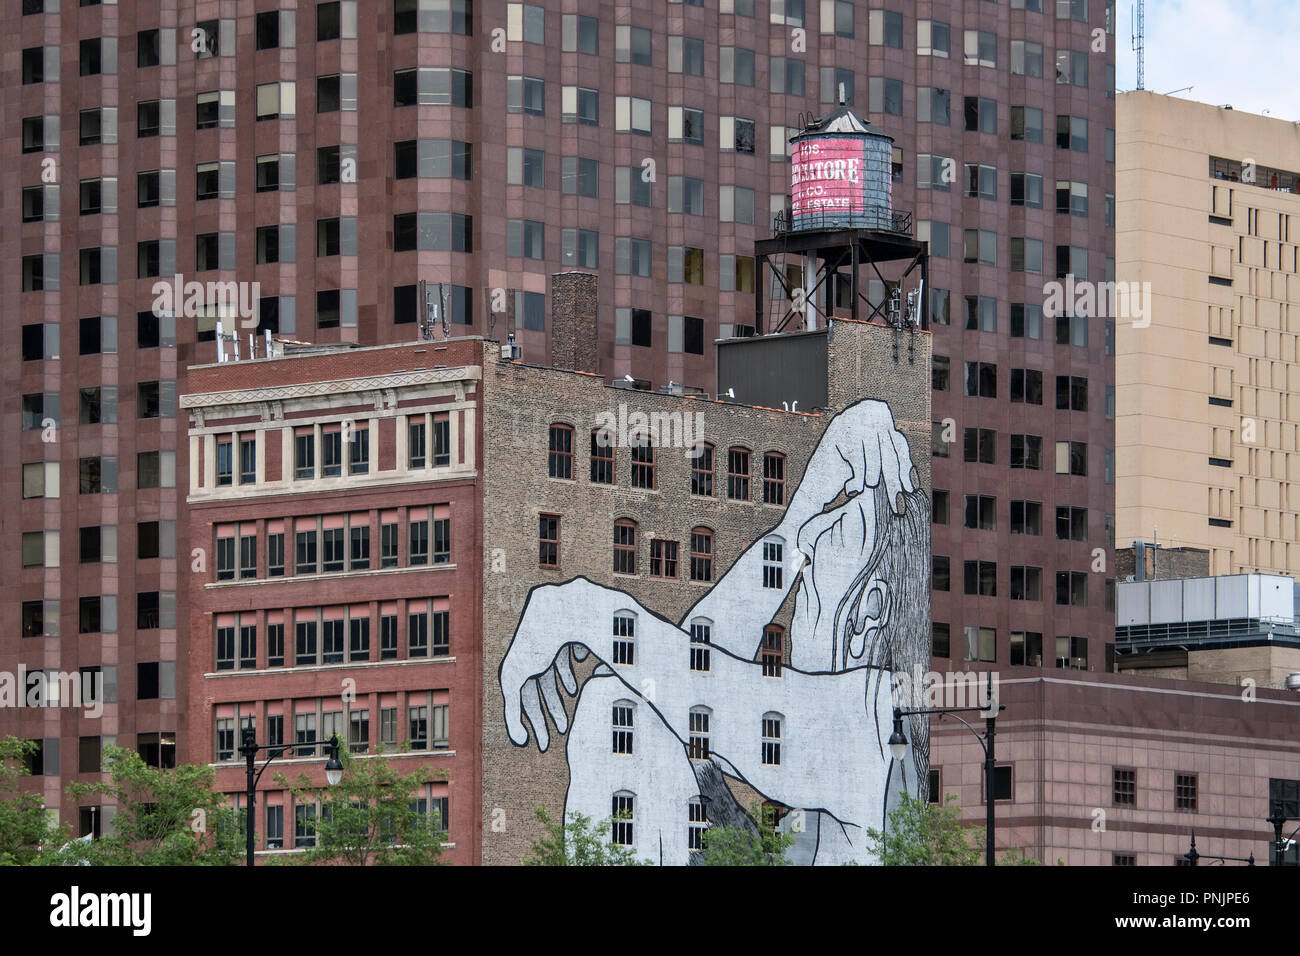 Detail of an old and new building with a large mural, Downtown Chicago, IL. Stock Photo